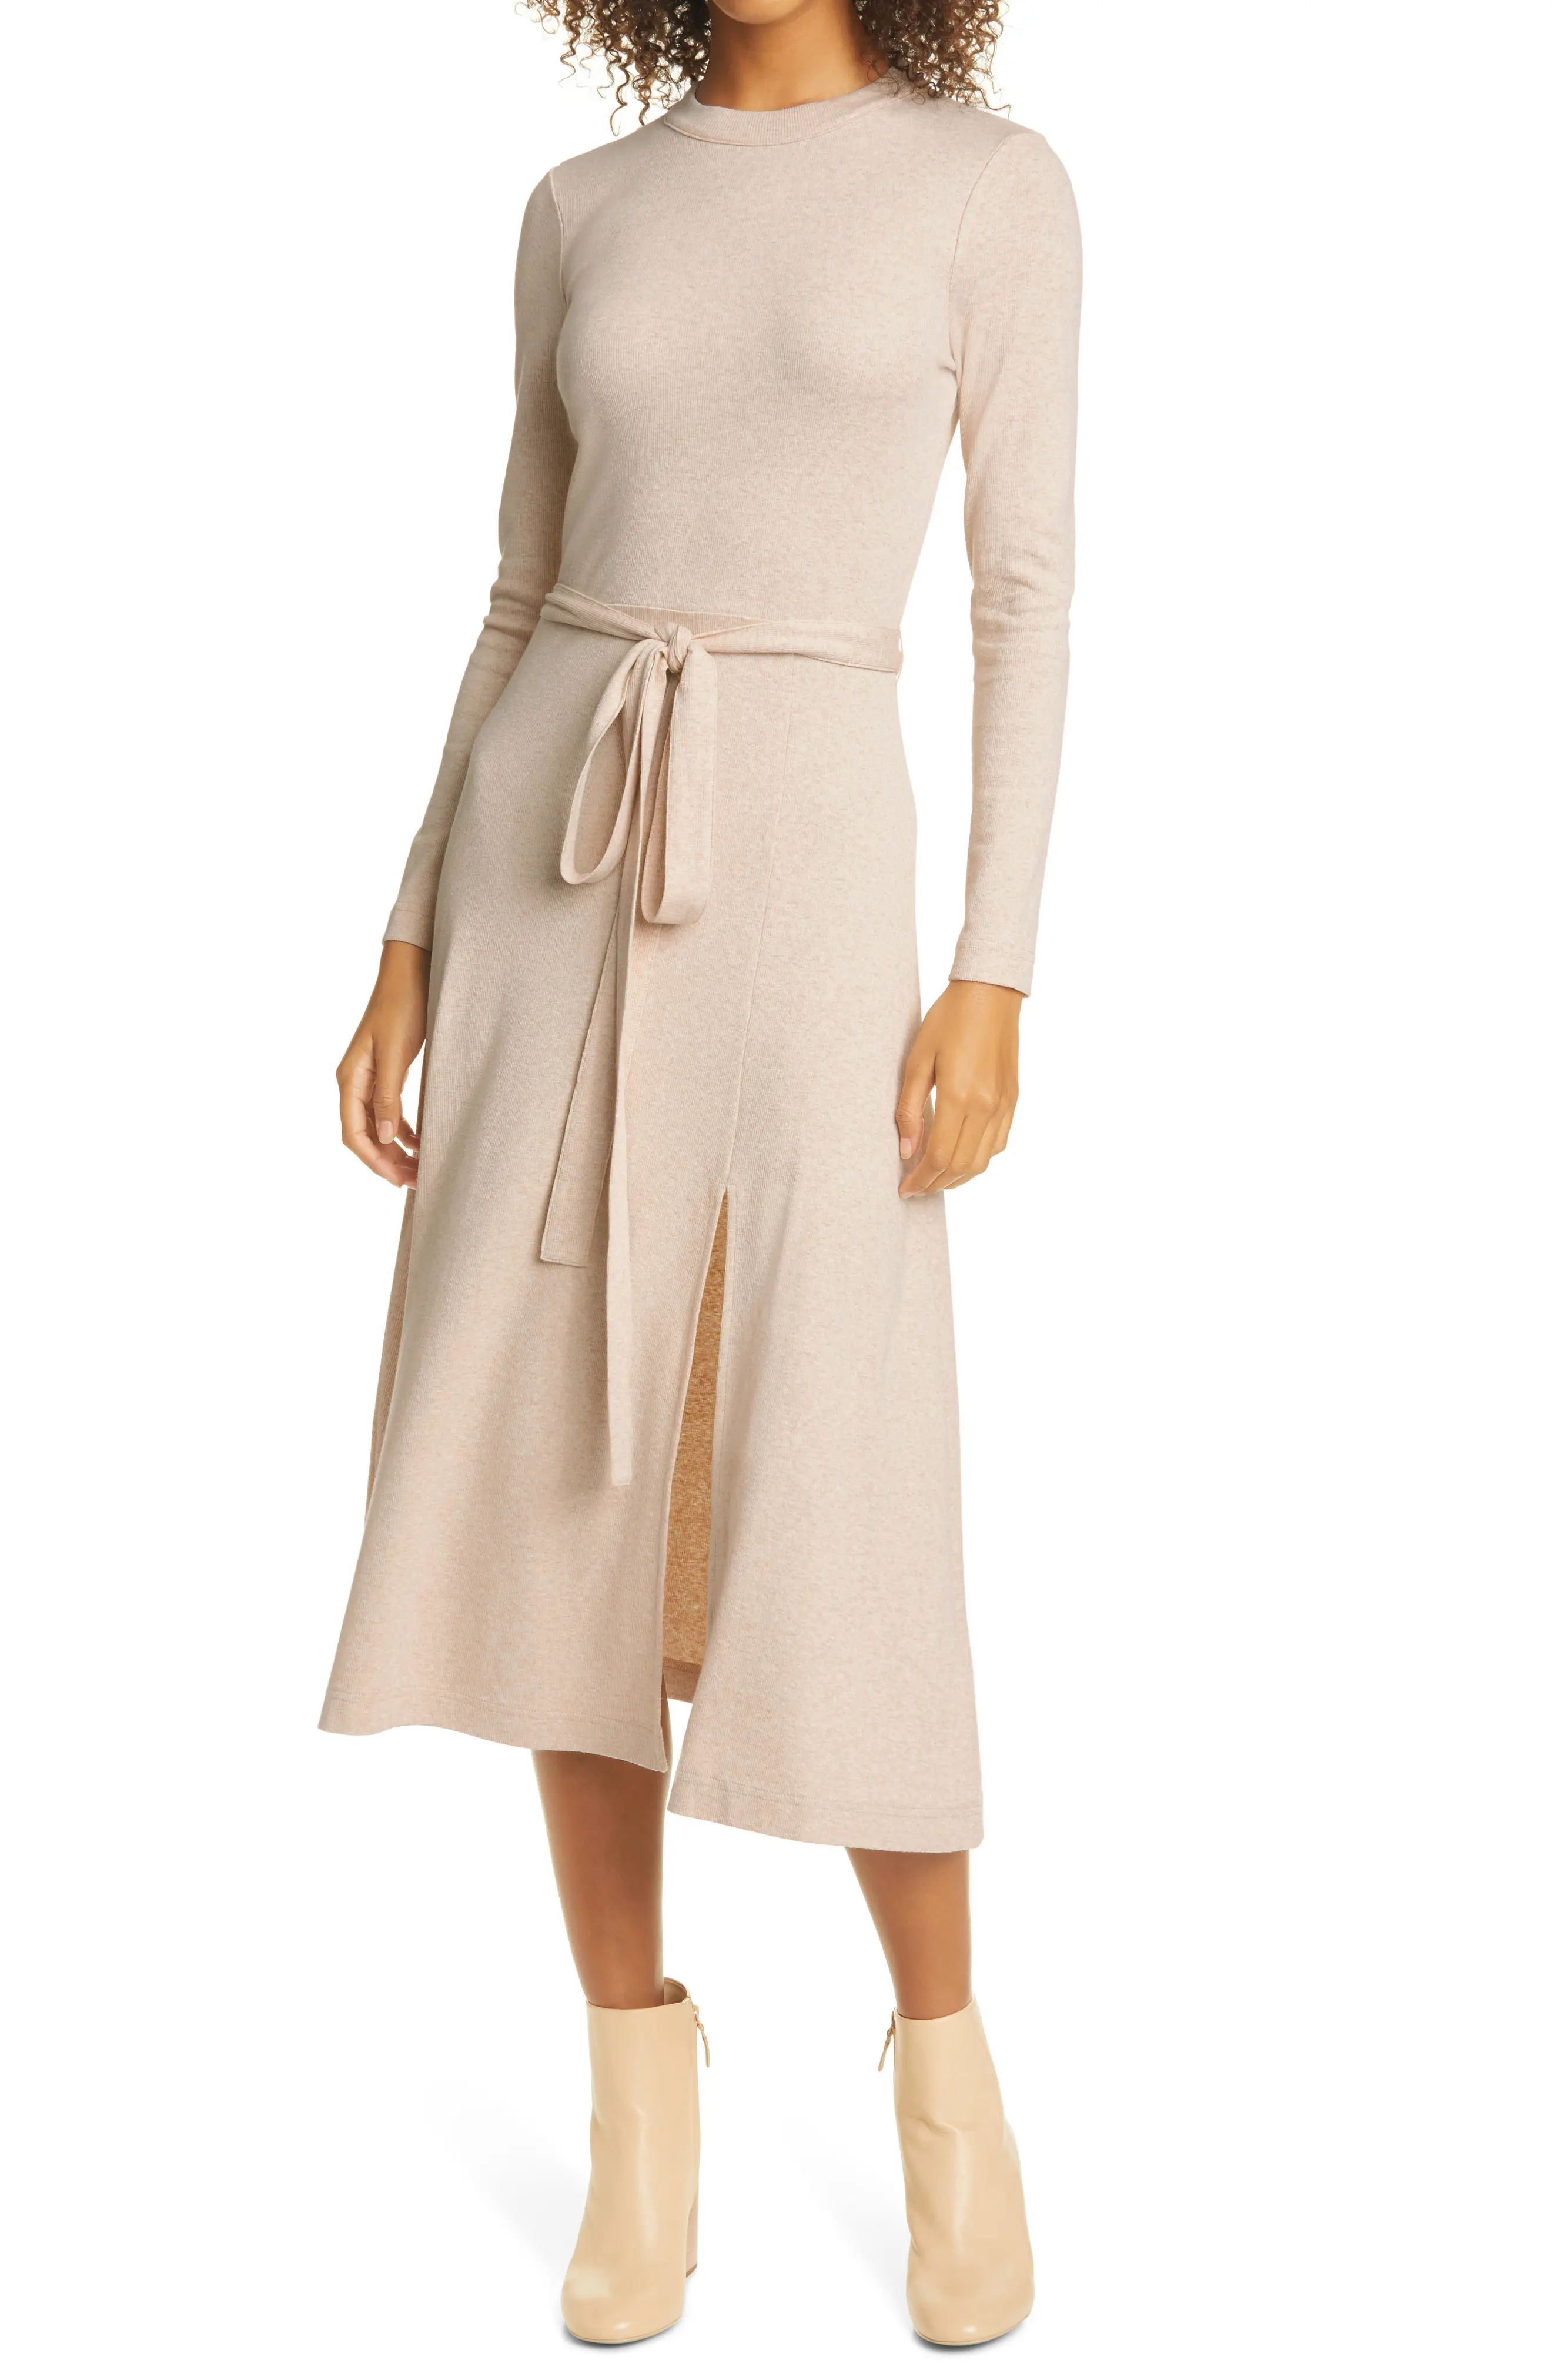 Club Monaco Tie Waist Long Sleeve Dress in Oatmeal Heather at Nordstrom, Size X-Large | Nordstrom